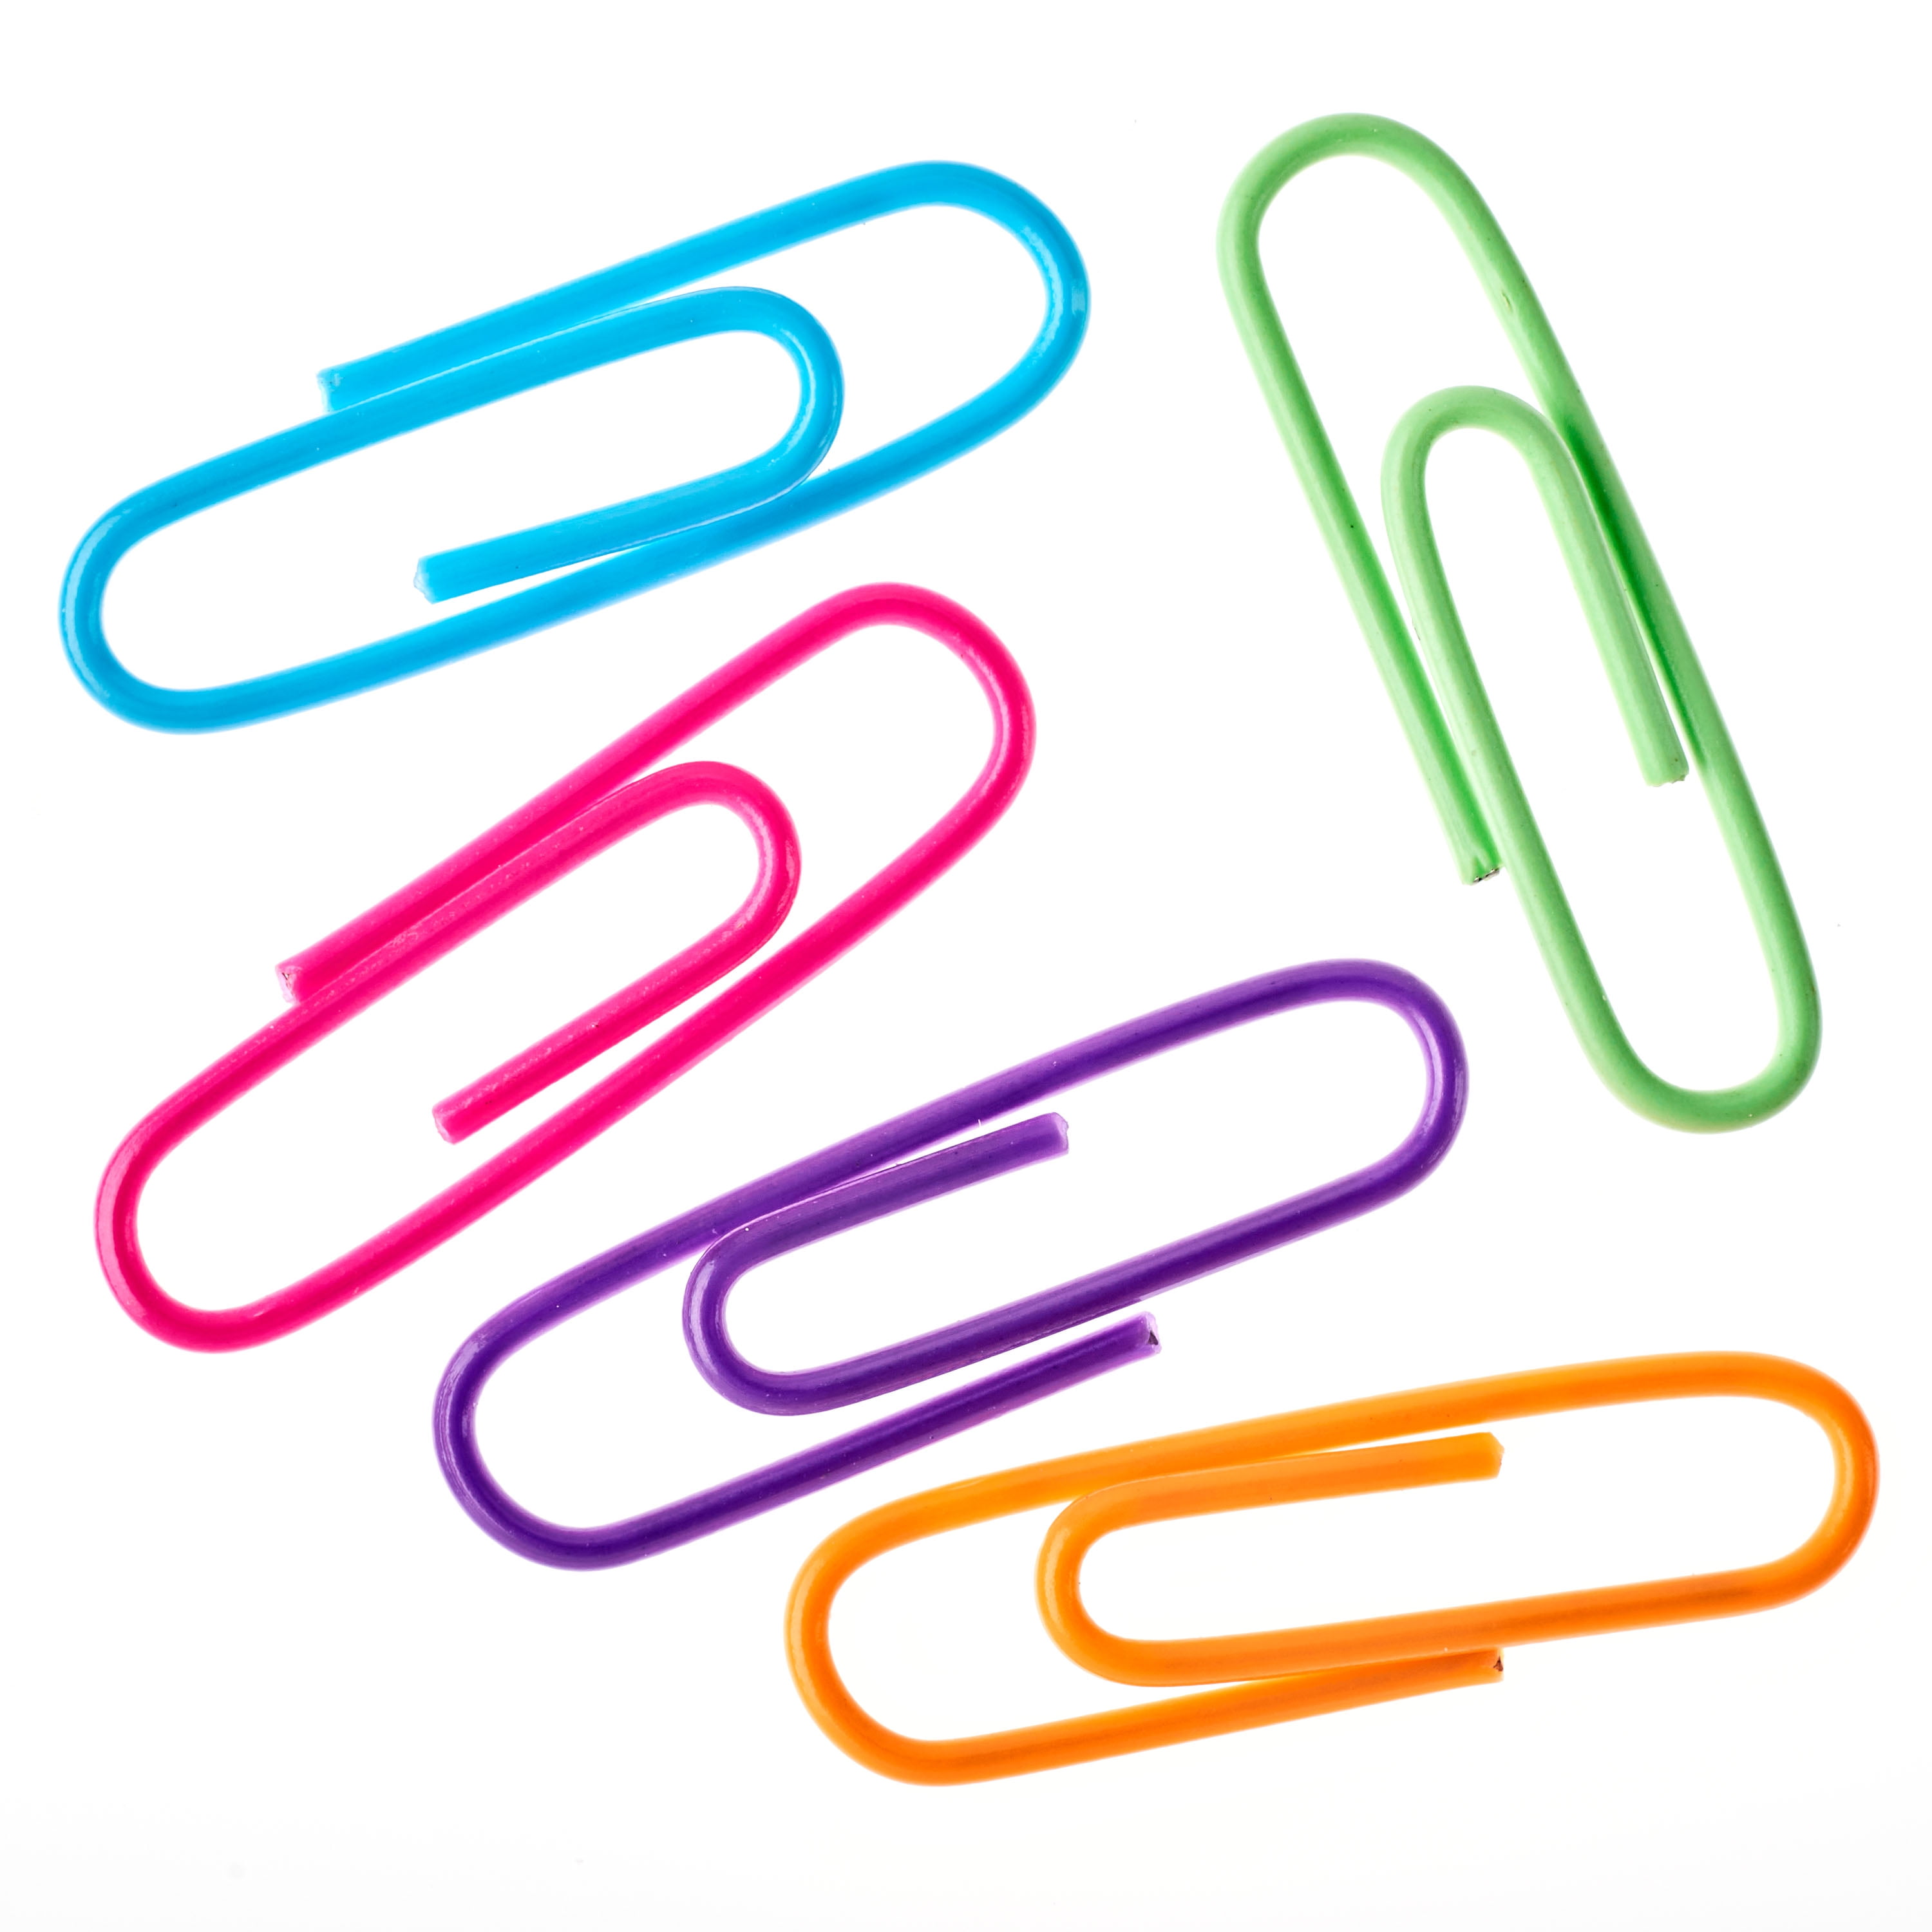 Pack Of 100 Assorted Colored Paper Clips, Metal Paper Clips, Plastic Coated  Gift